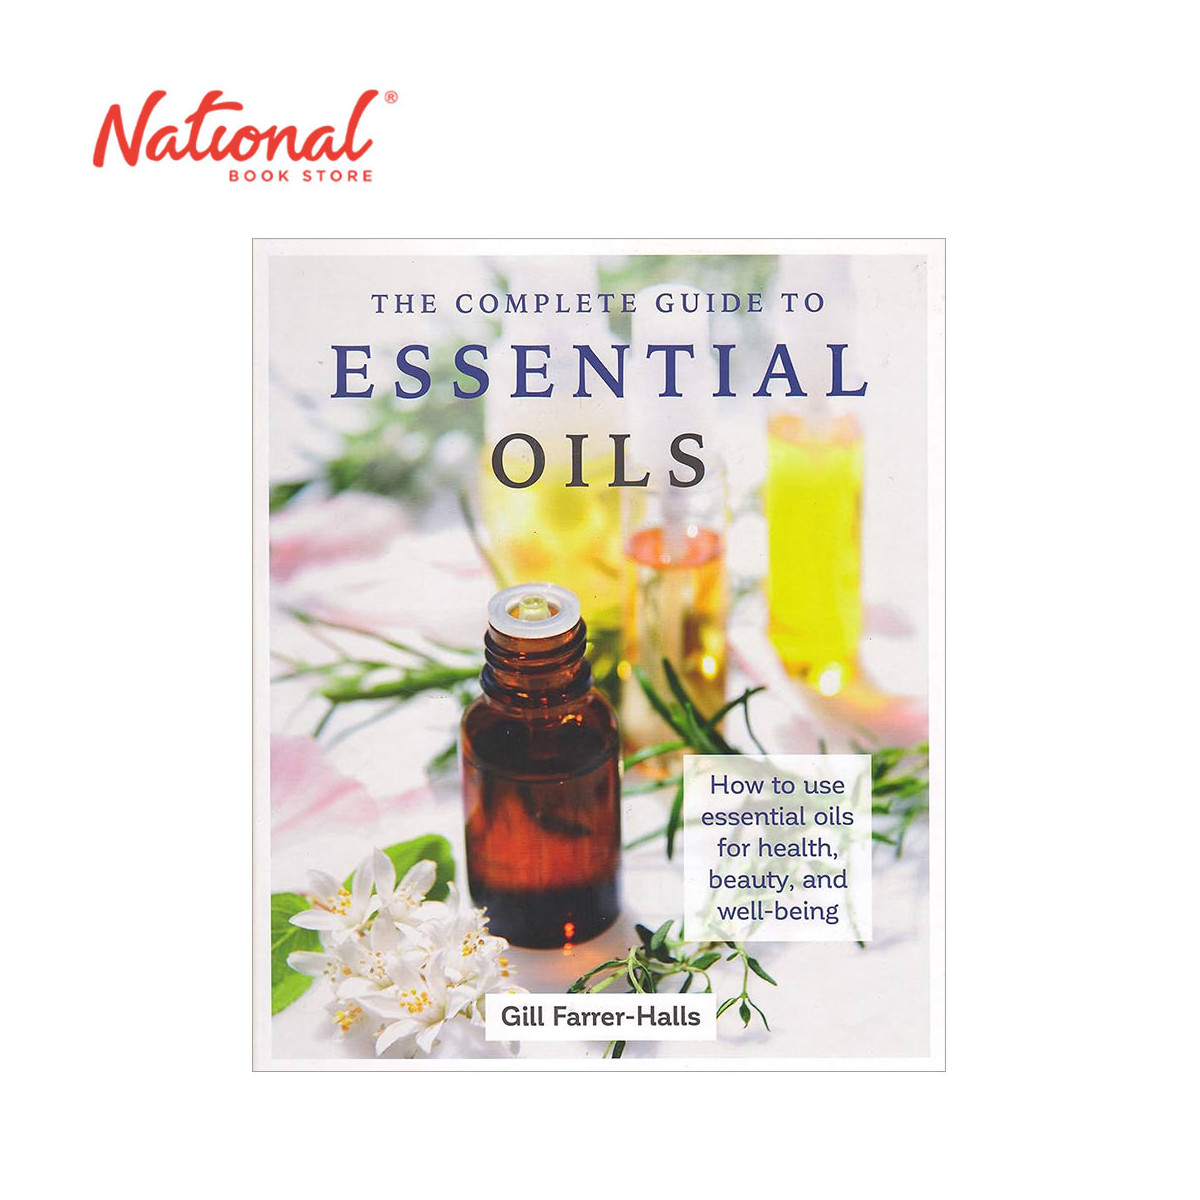 The Complete Guide to Essential Oils by Gill Farrer-Halls - Hardcover - Health & Fitness